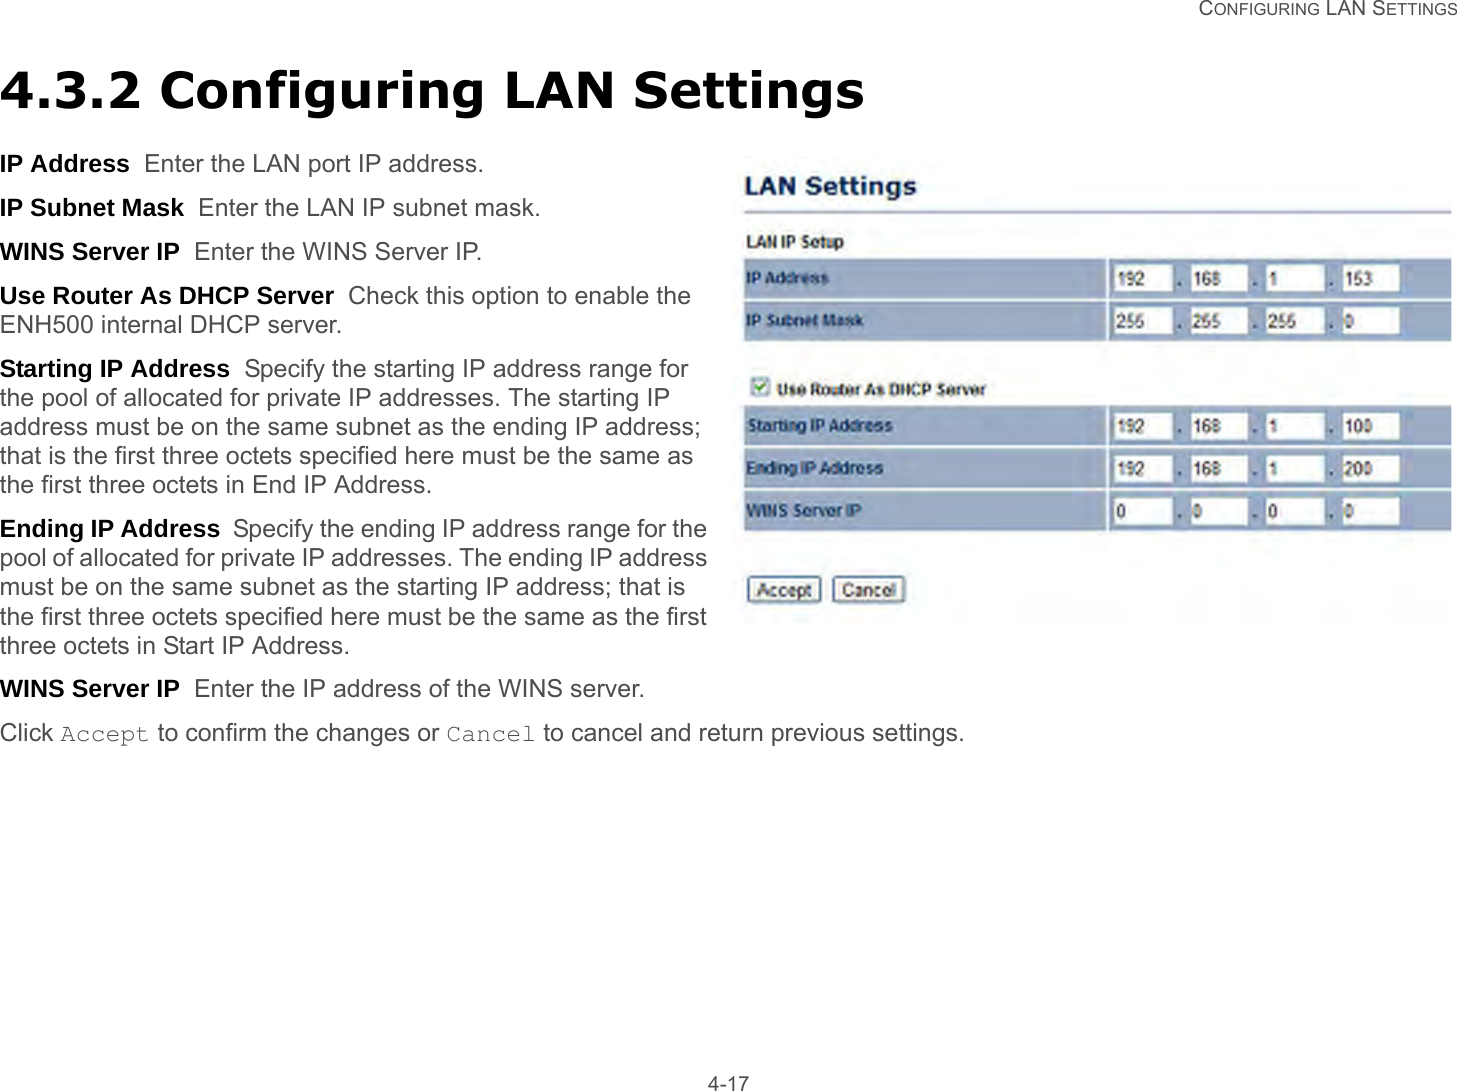   CONFIGURING LAN SETTINGS 4-174.3.2 Configuring LAN SettingsIP Address  Enter the LAN port IP address.IP Subnet Mask  Enter the LAN IP subnet mask.WINS Server IP  Enter the WINS Server IP.Use Router As DHCP Server  Check this option to enable the ENH500 internal DHCP server.Starting IP Address  Specify the starting IP address range for the pool of allocated for private IP addresses. The starting IP address must be on the same subnet as the ending IP address; that is the first three octets specified here must be the same as the first three octets in End IP Address.Ending IP Address  Specify the ending IP address range for the pool of allocated for private IP addresses. The ending IP address must be on the same subnet as the starting IP address; that is the first three octets specified here must be the same as the first three octets in Start IP Address.WINS Server IP  Enter the IP address of the WINS server.Click Accept to confirm the changes or Cancel to cancel and return previous settings.